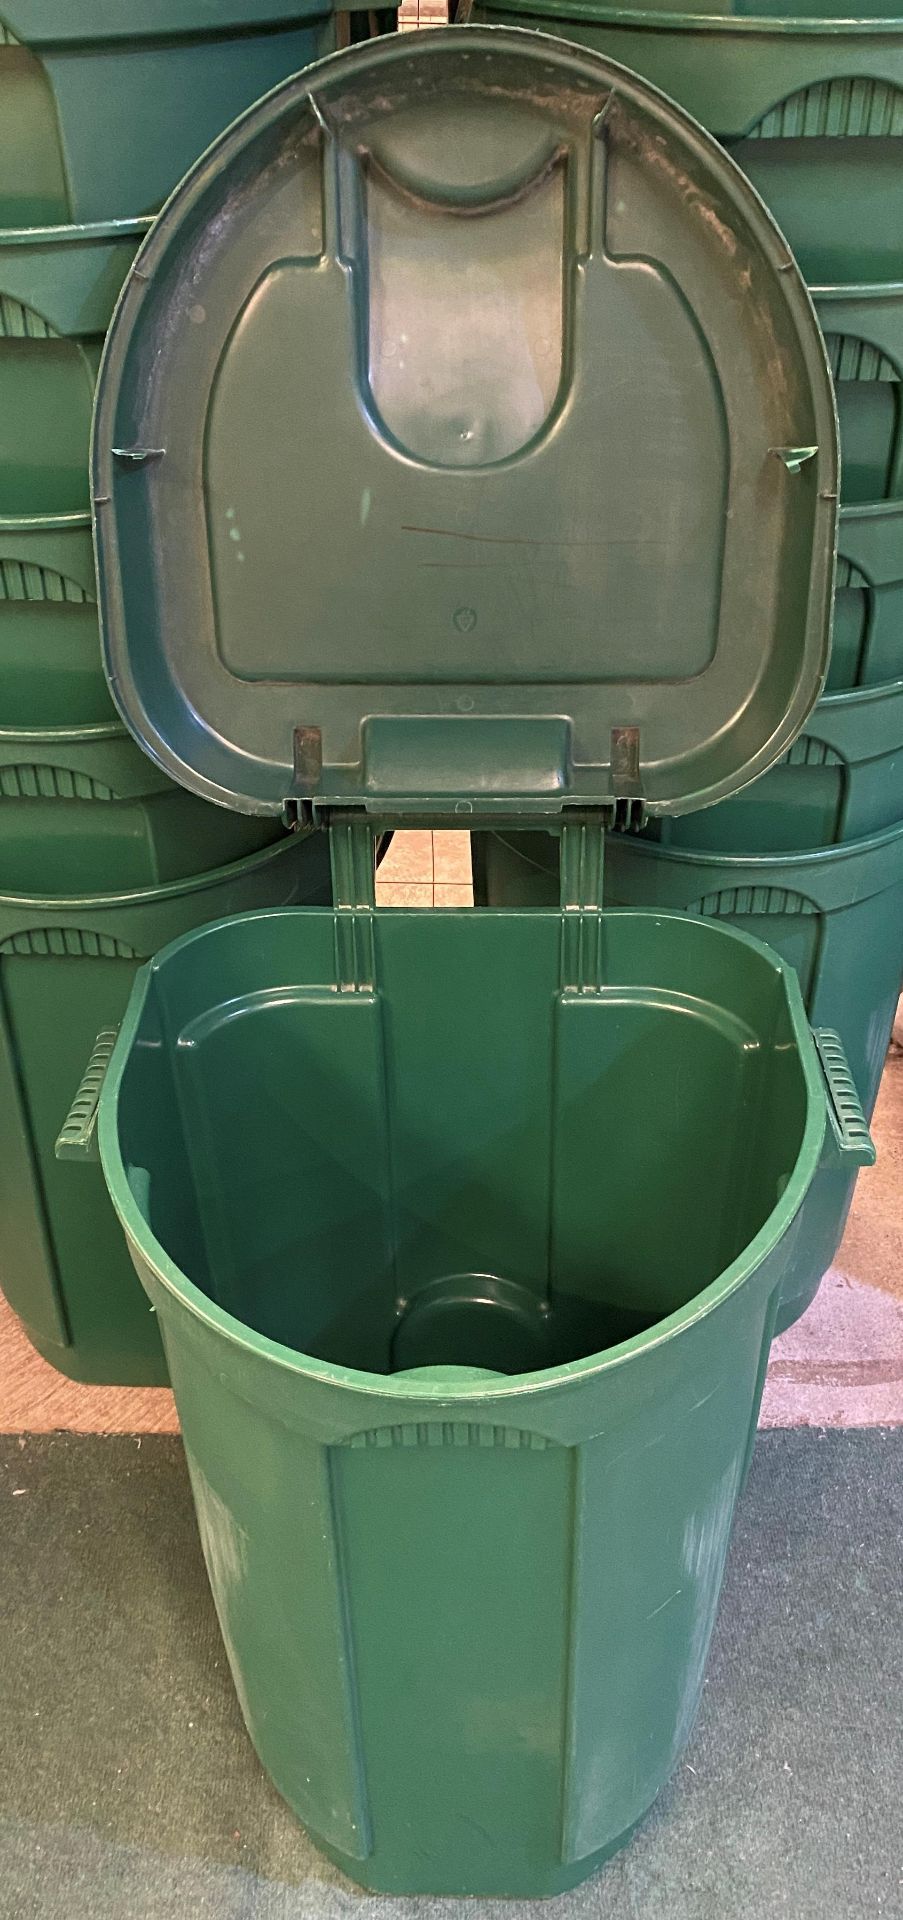 36 x EDA 110L Green Wheelie Bins - used for laundry - Image 4 of 5